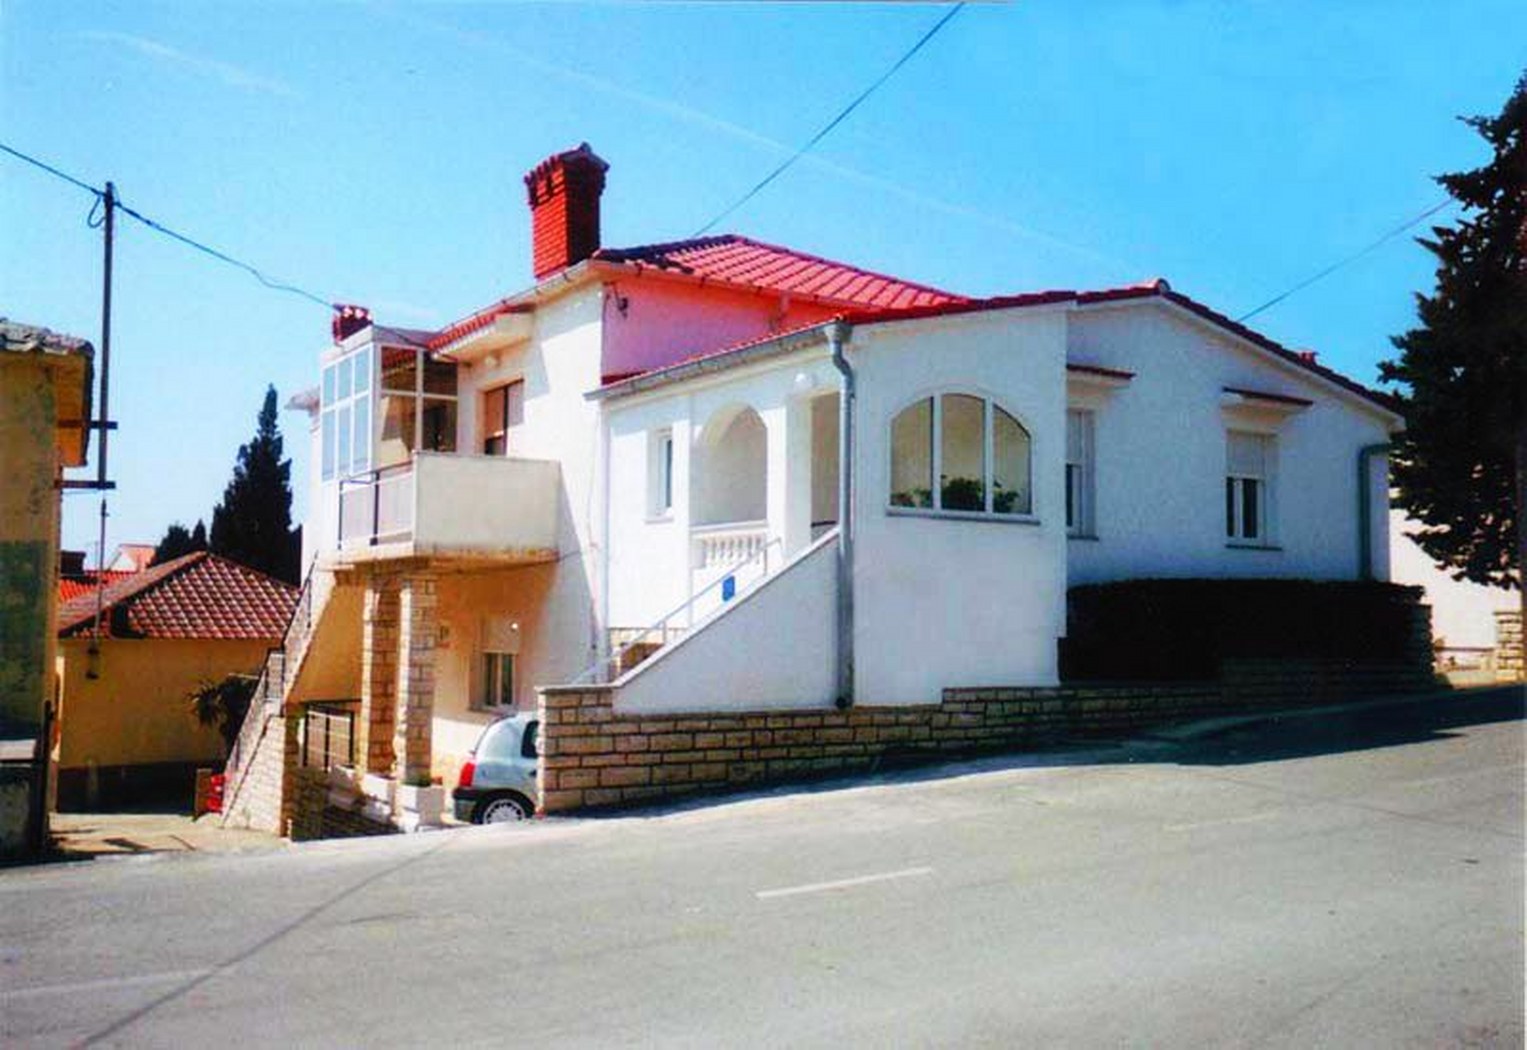 Apartments Kati - 150 m from center: A1(3+1), A2(2+1), A3(6+2) Novalja - Island Pag 